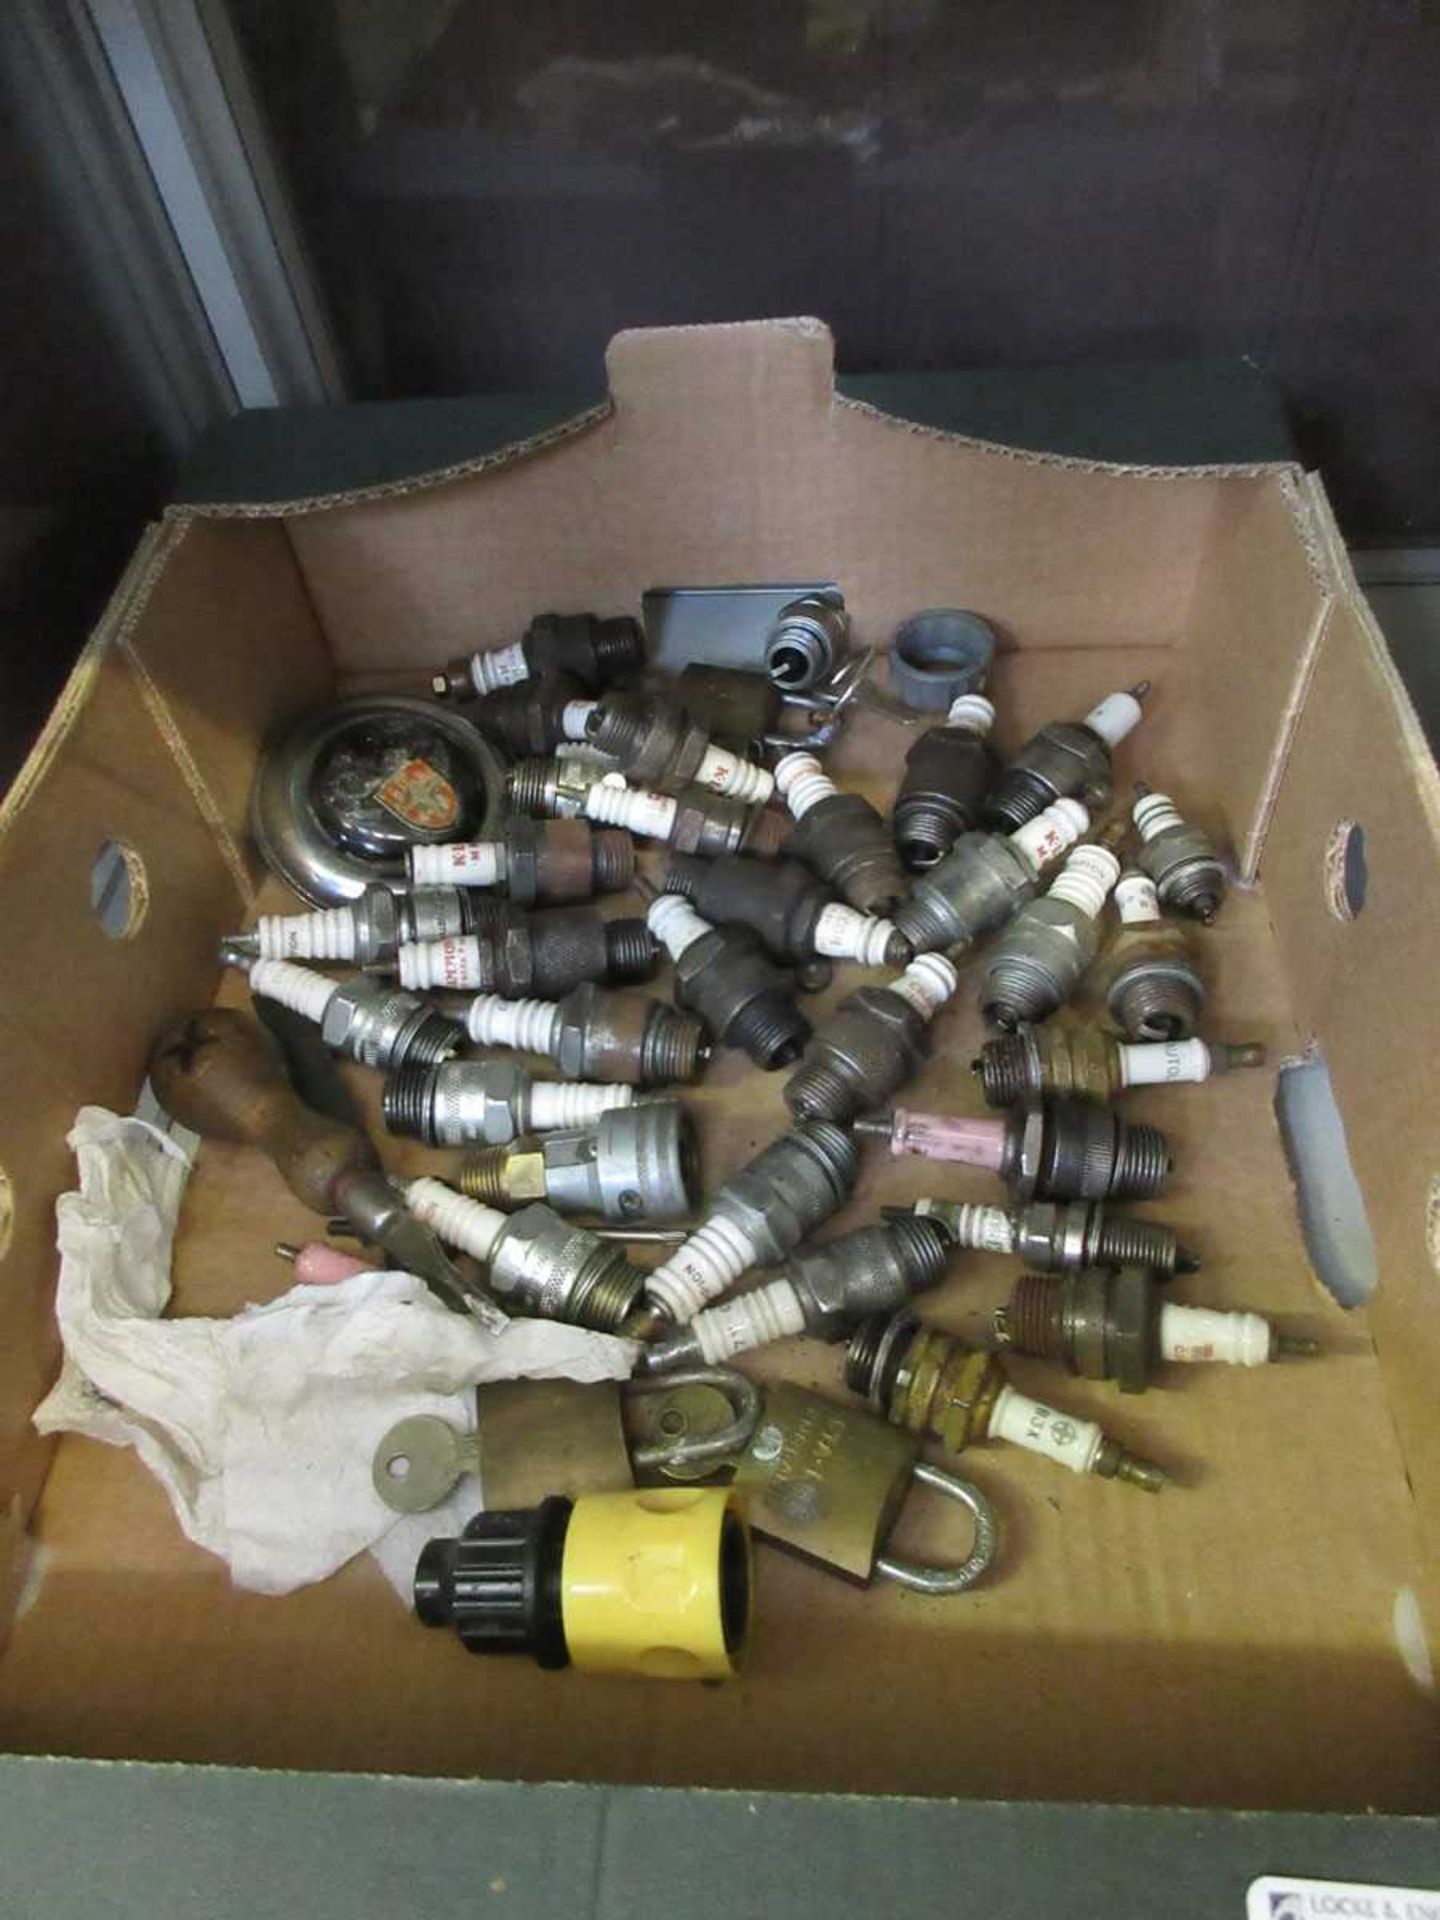 A box containing a quantity of used spark plugs